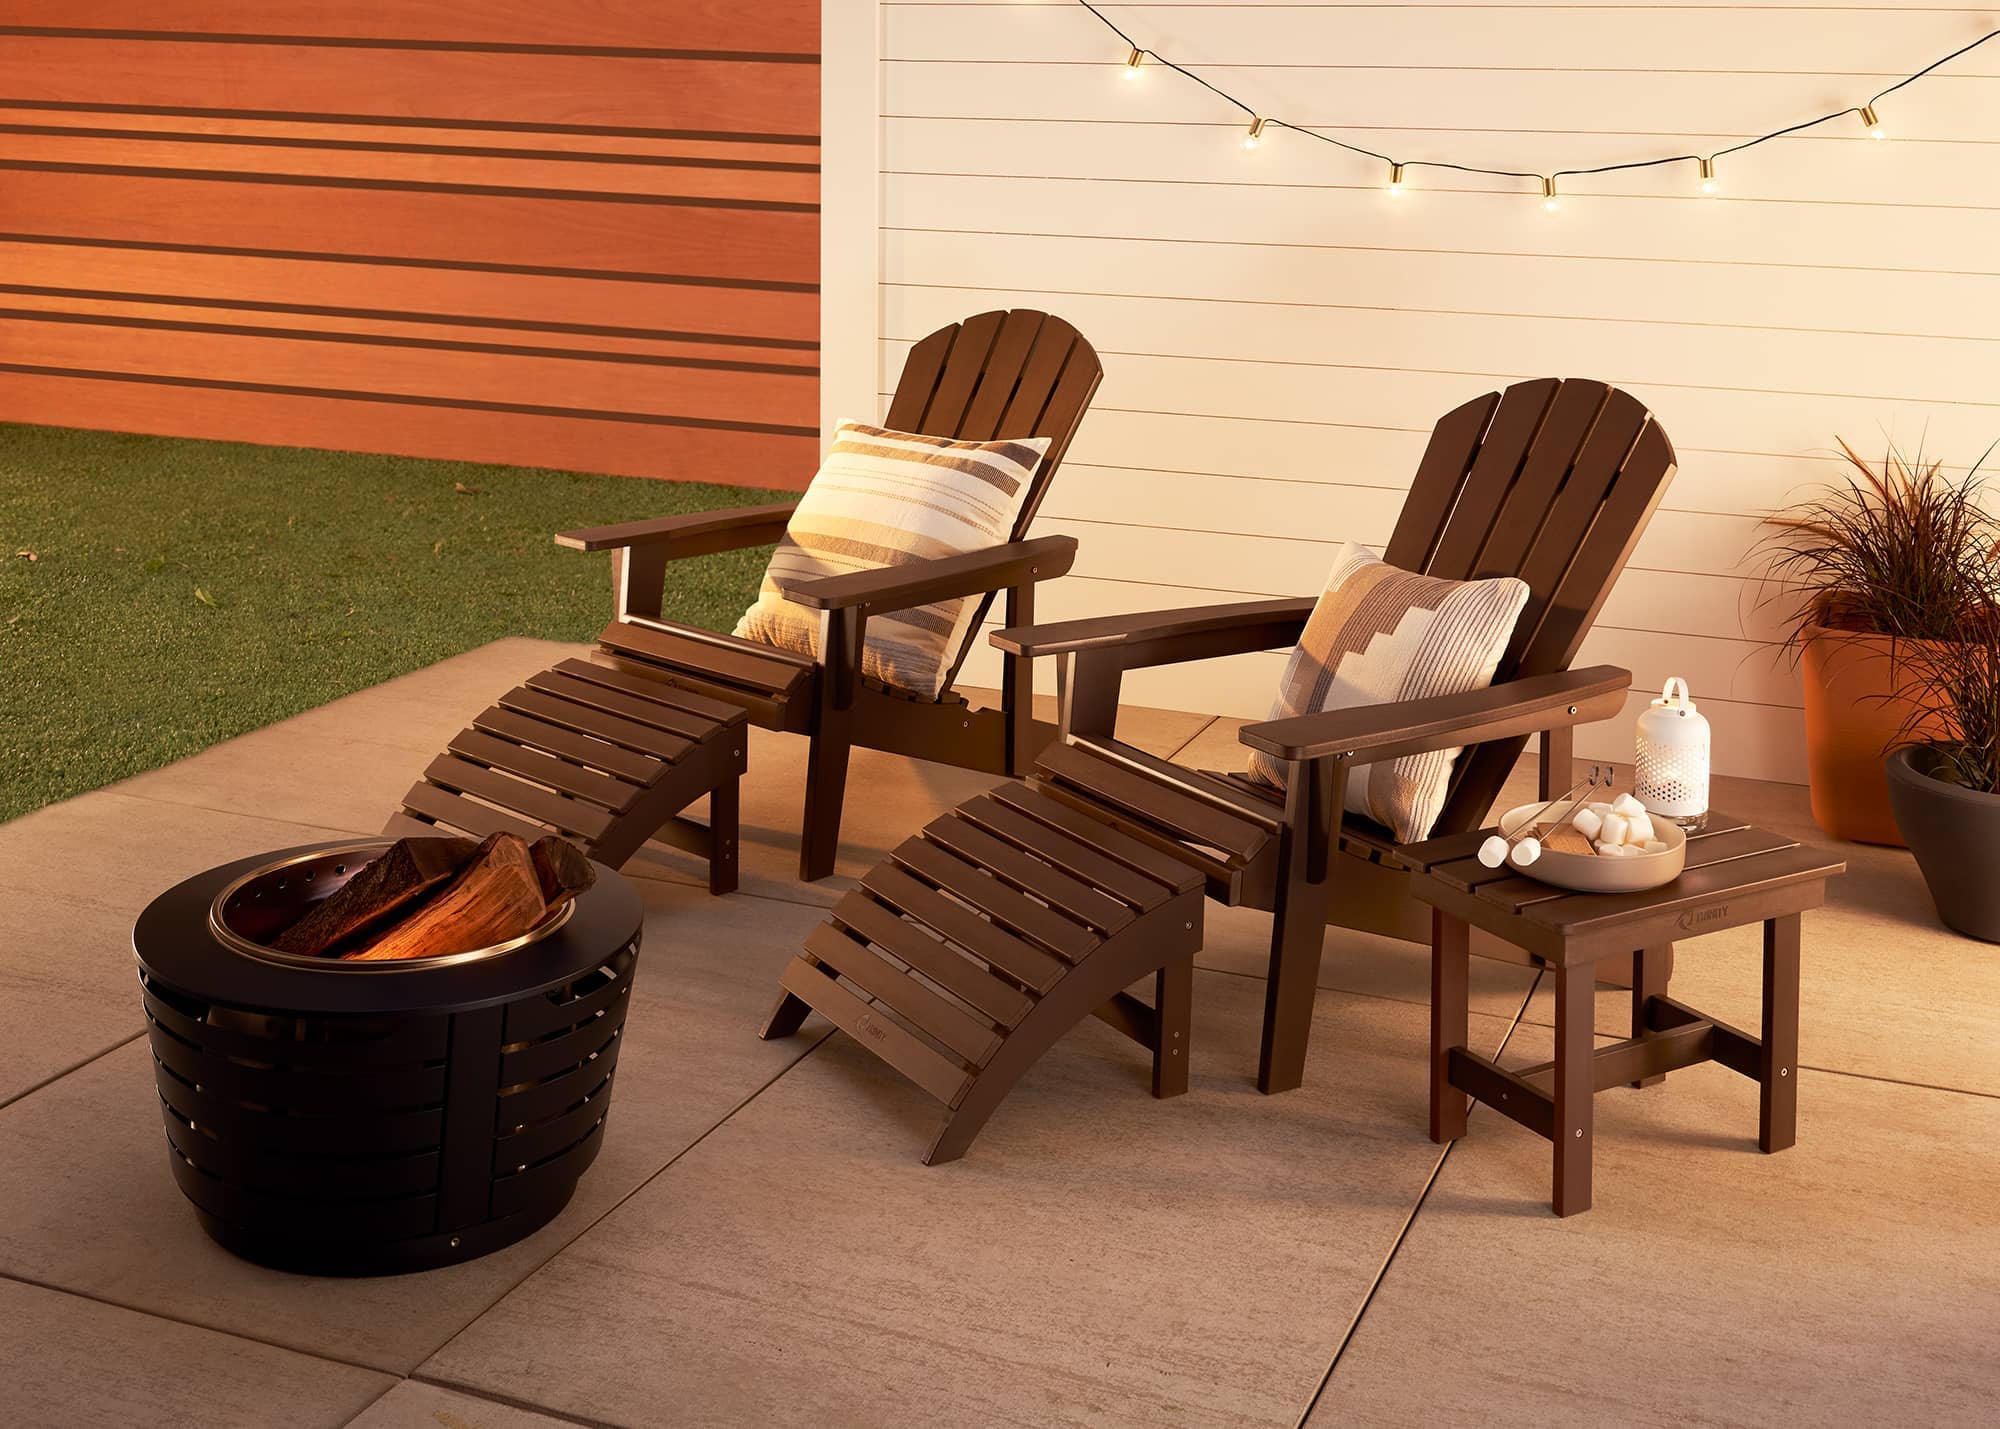 gray adirondack chair set with footrests and side table